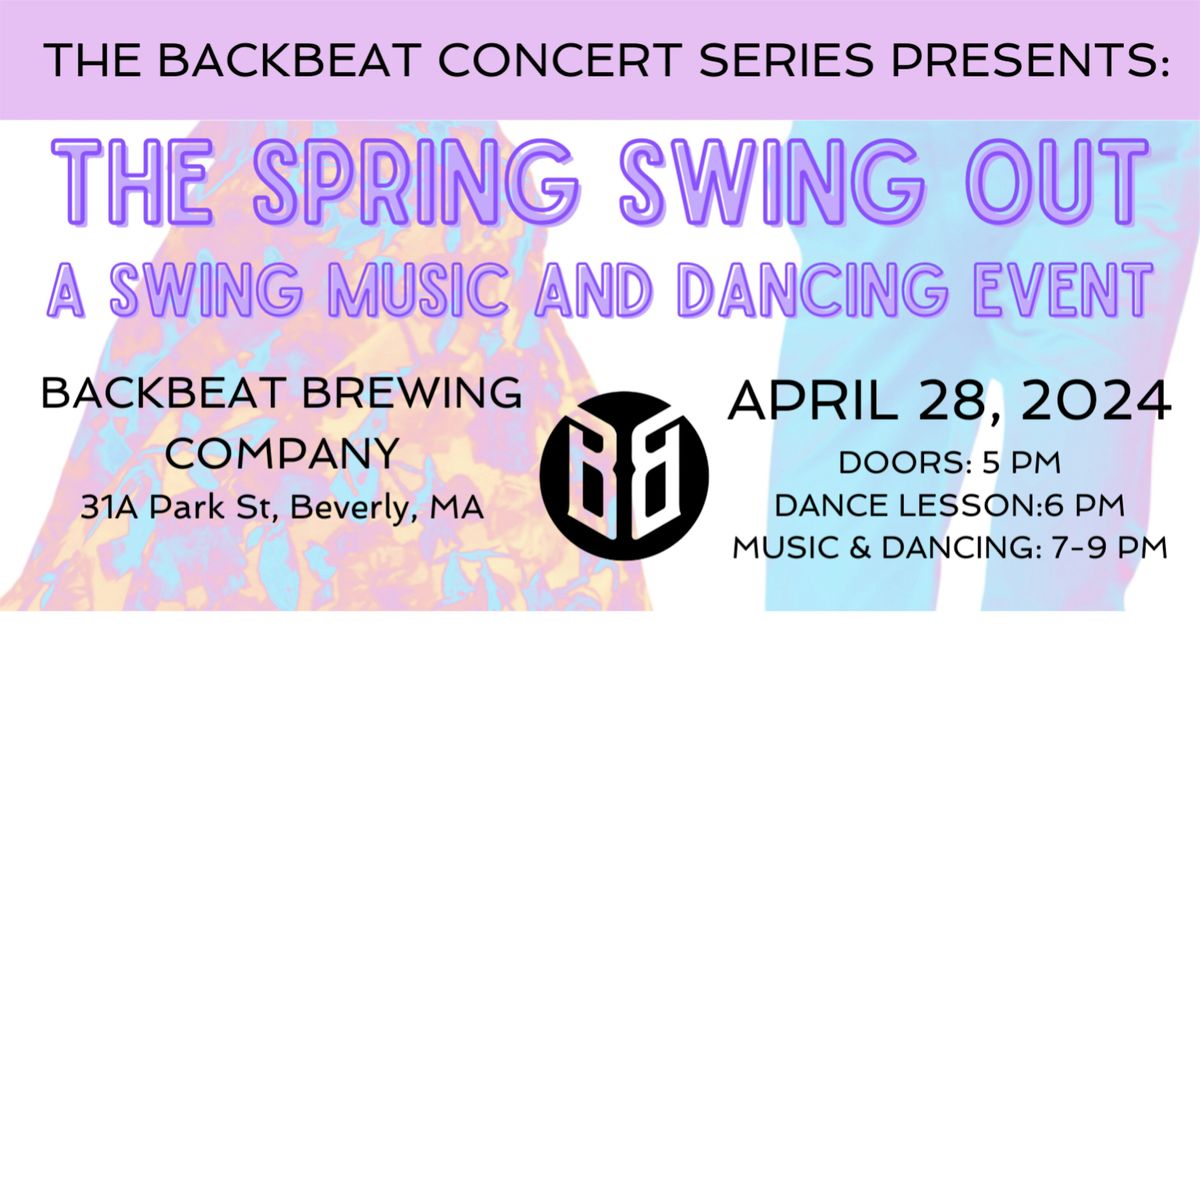 The Spring Swing Out